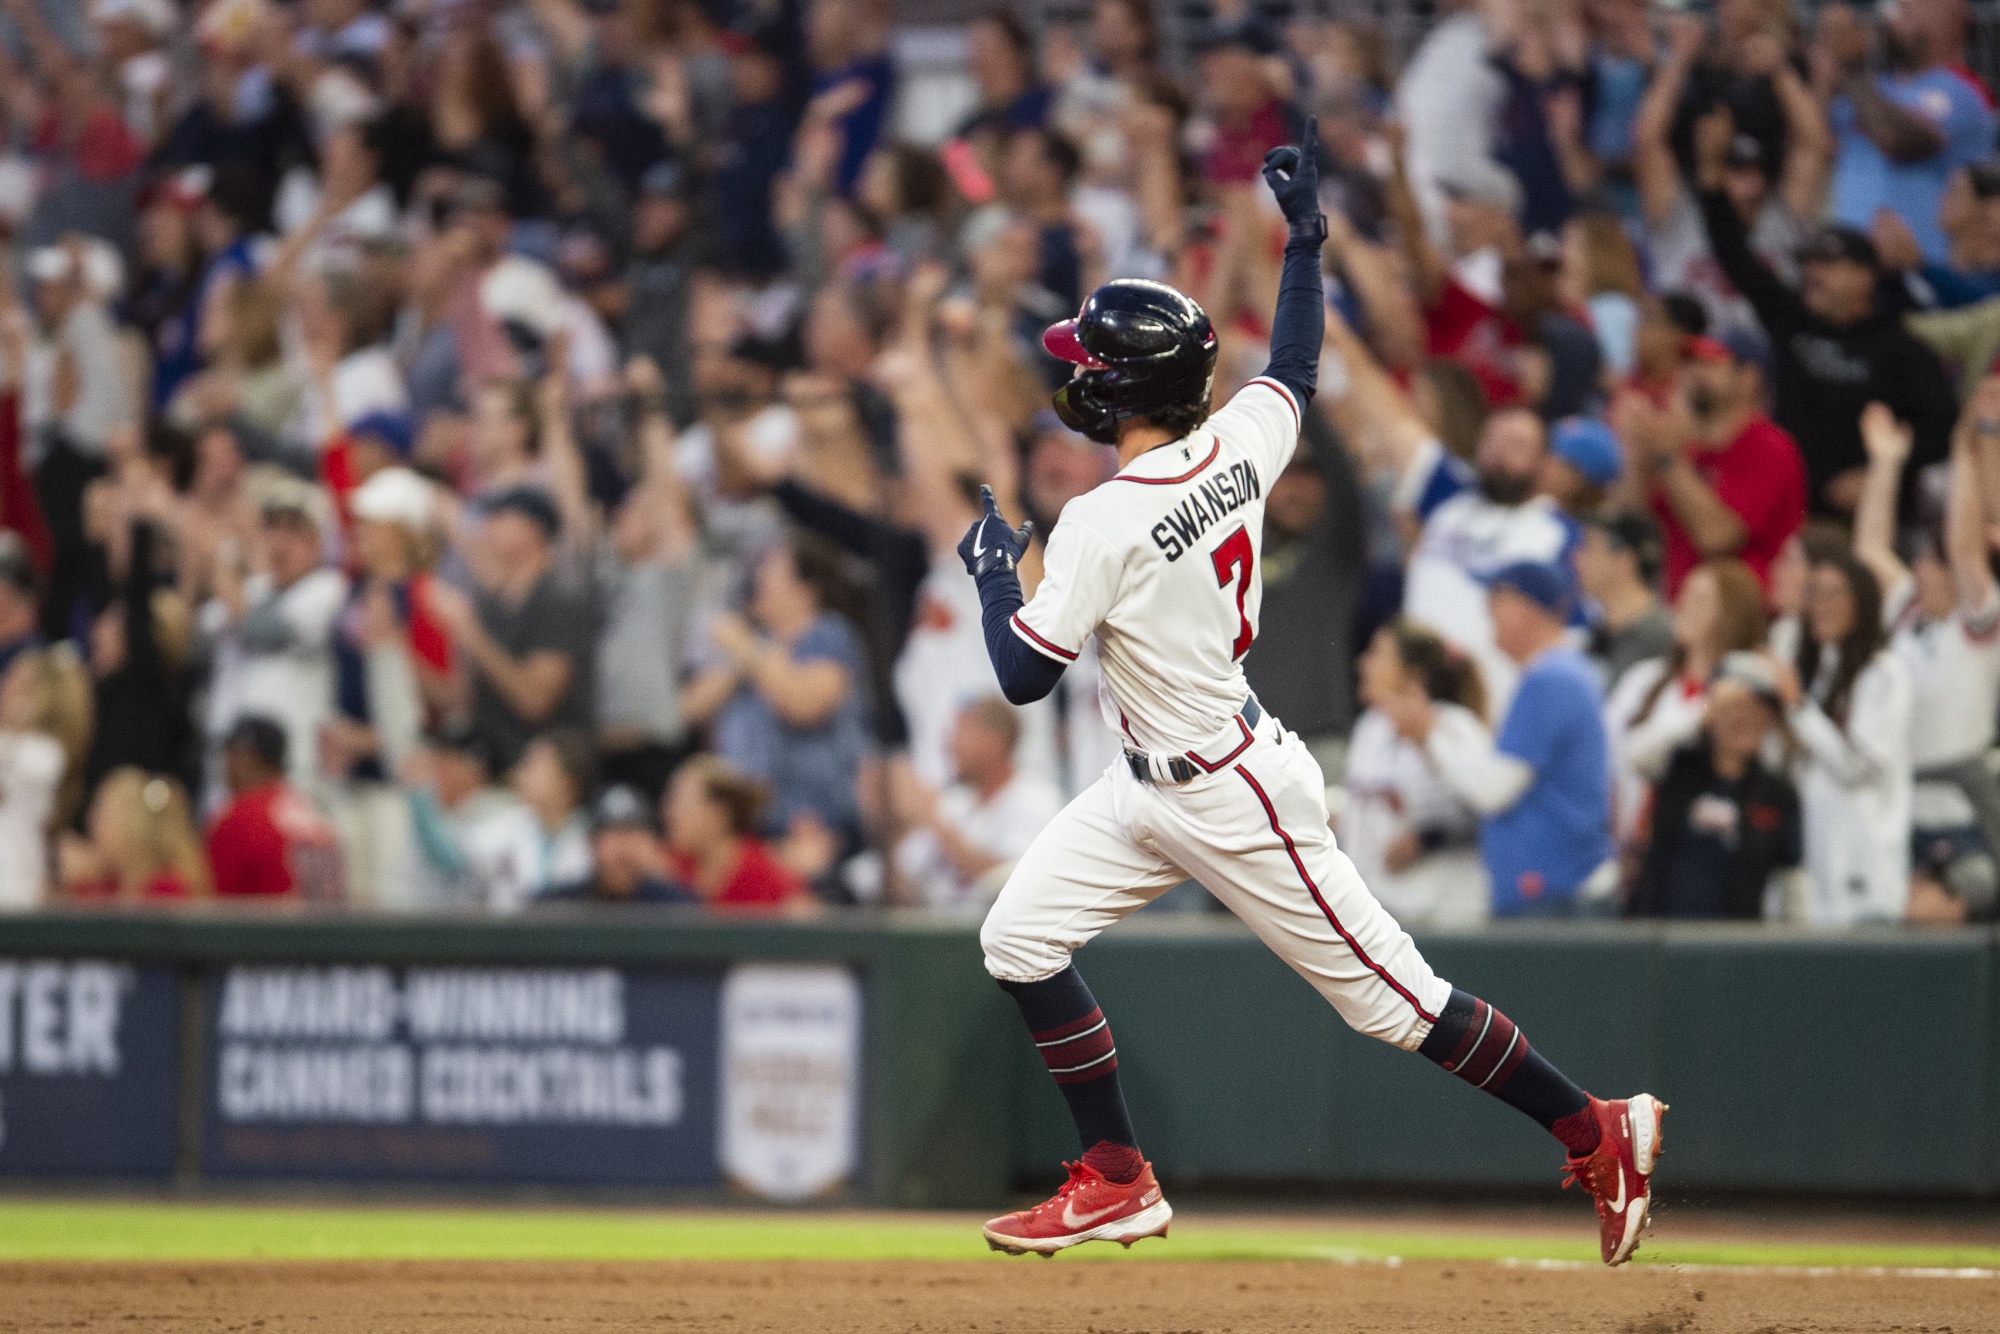 Acuna gets married, hits 30th homer